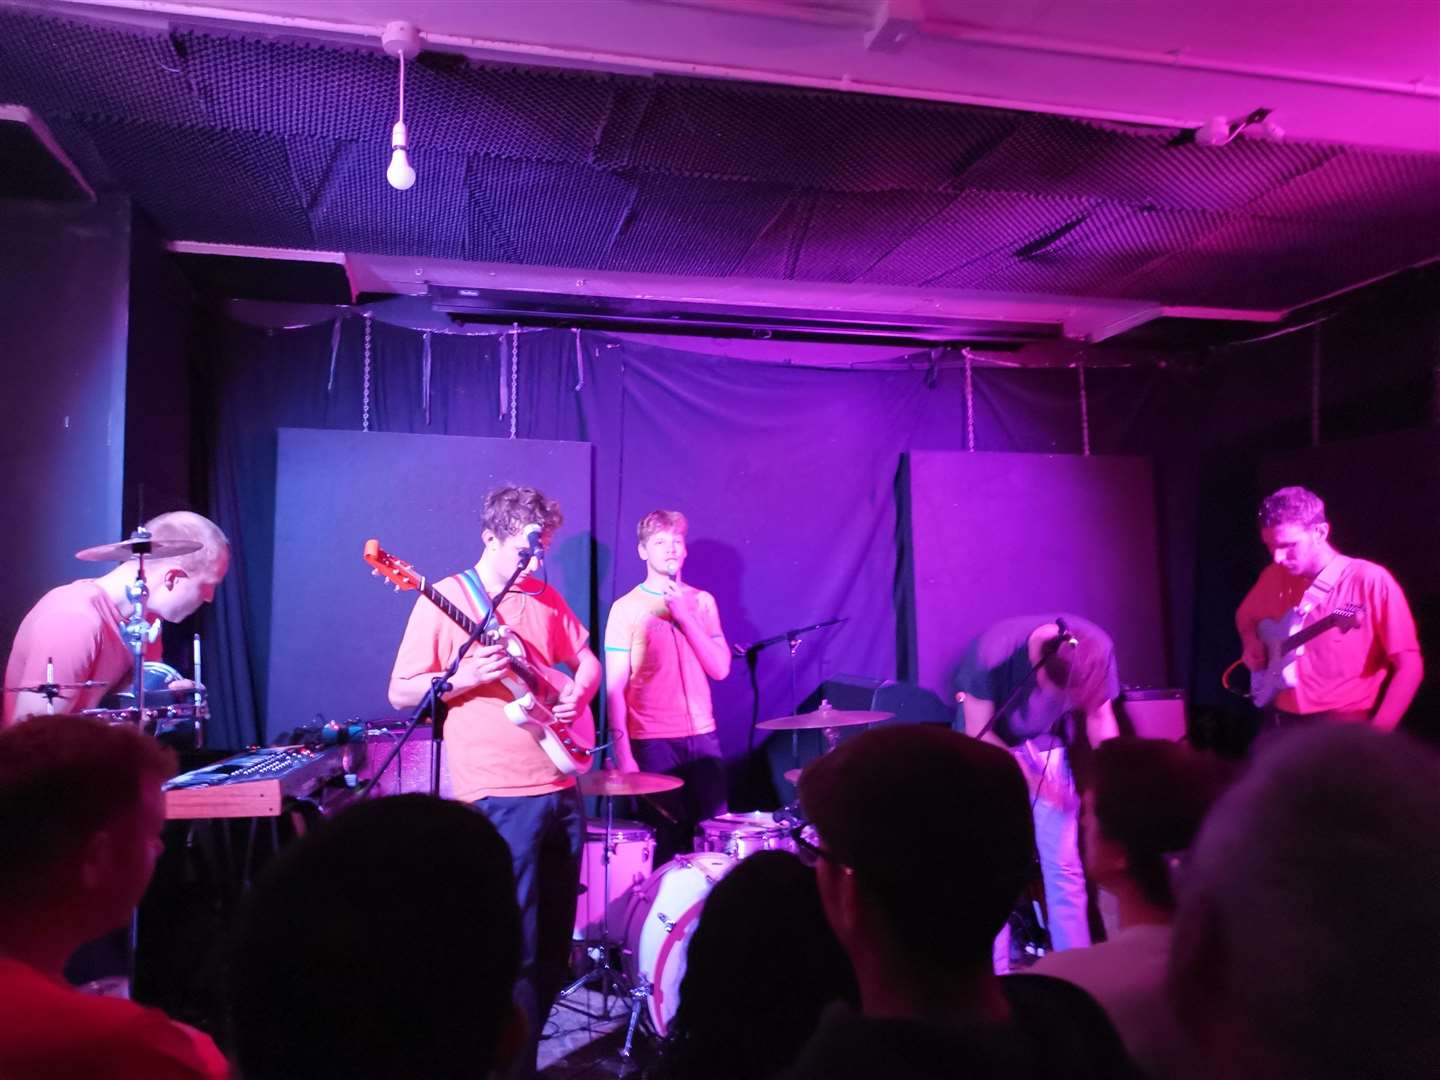 Pictured - Squid performing at Elsewhere in Margate